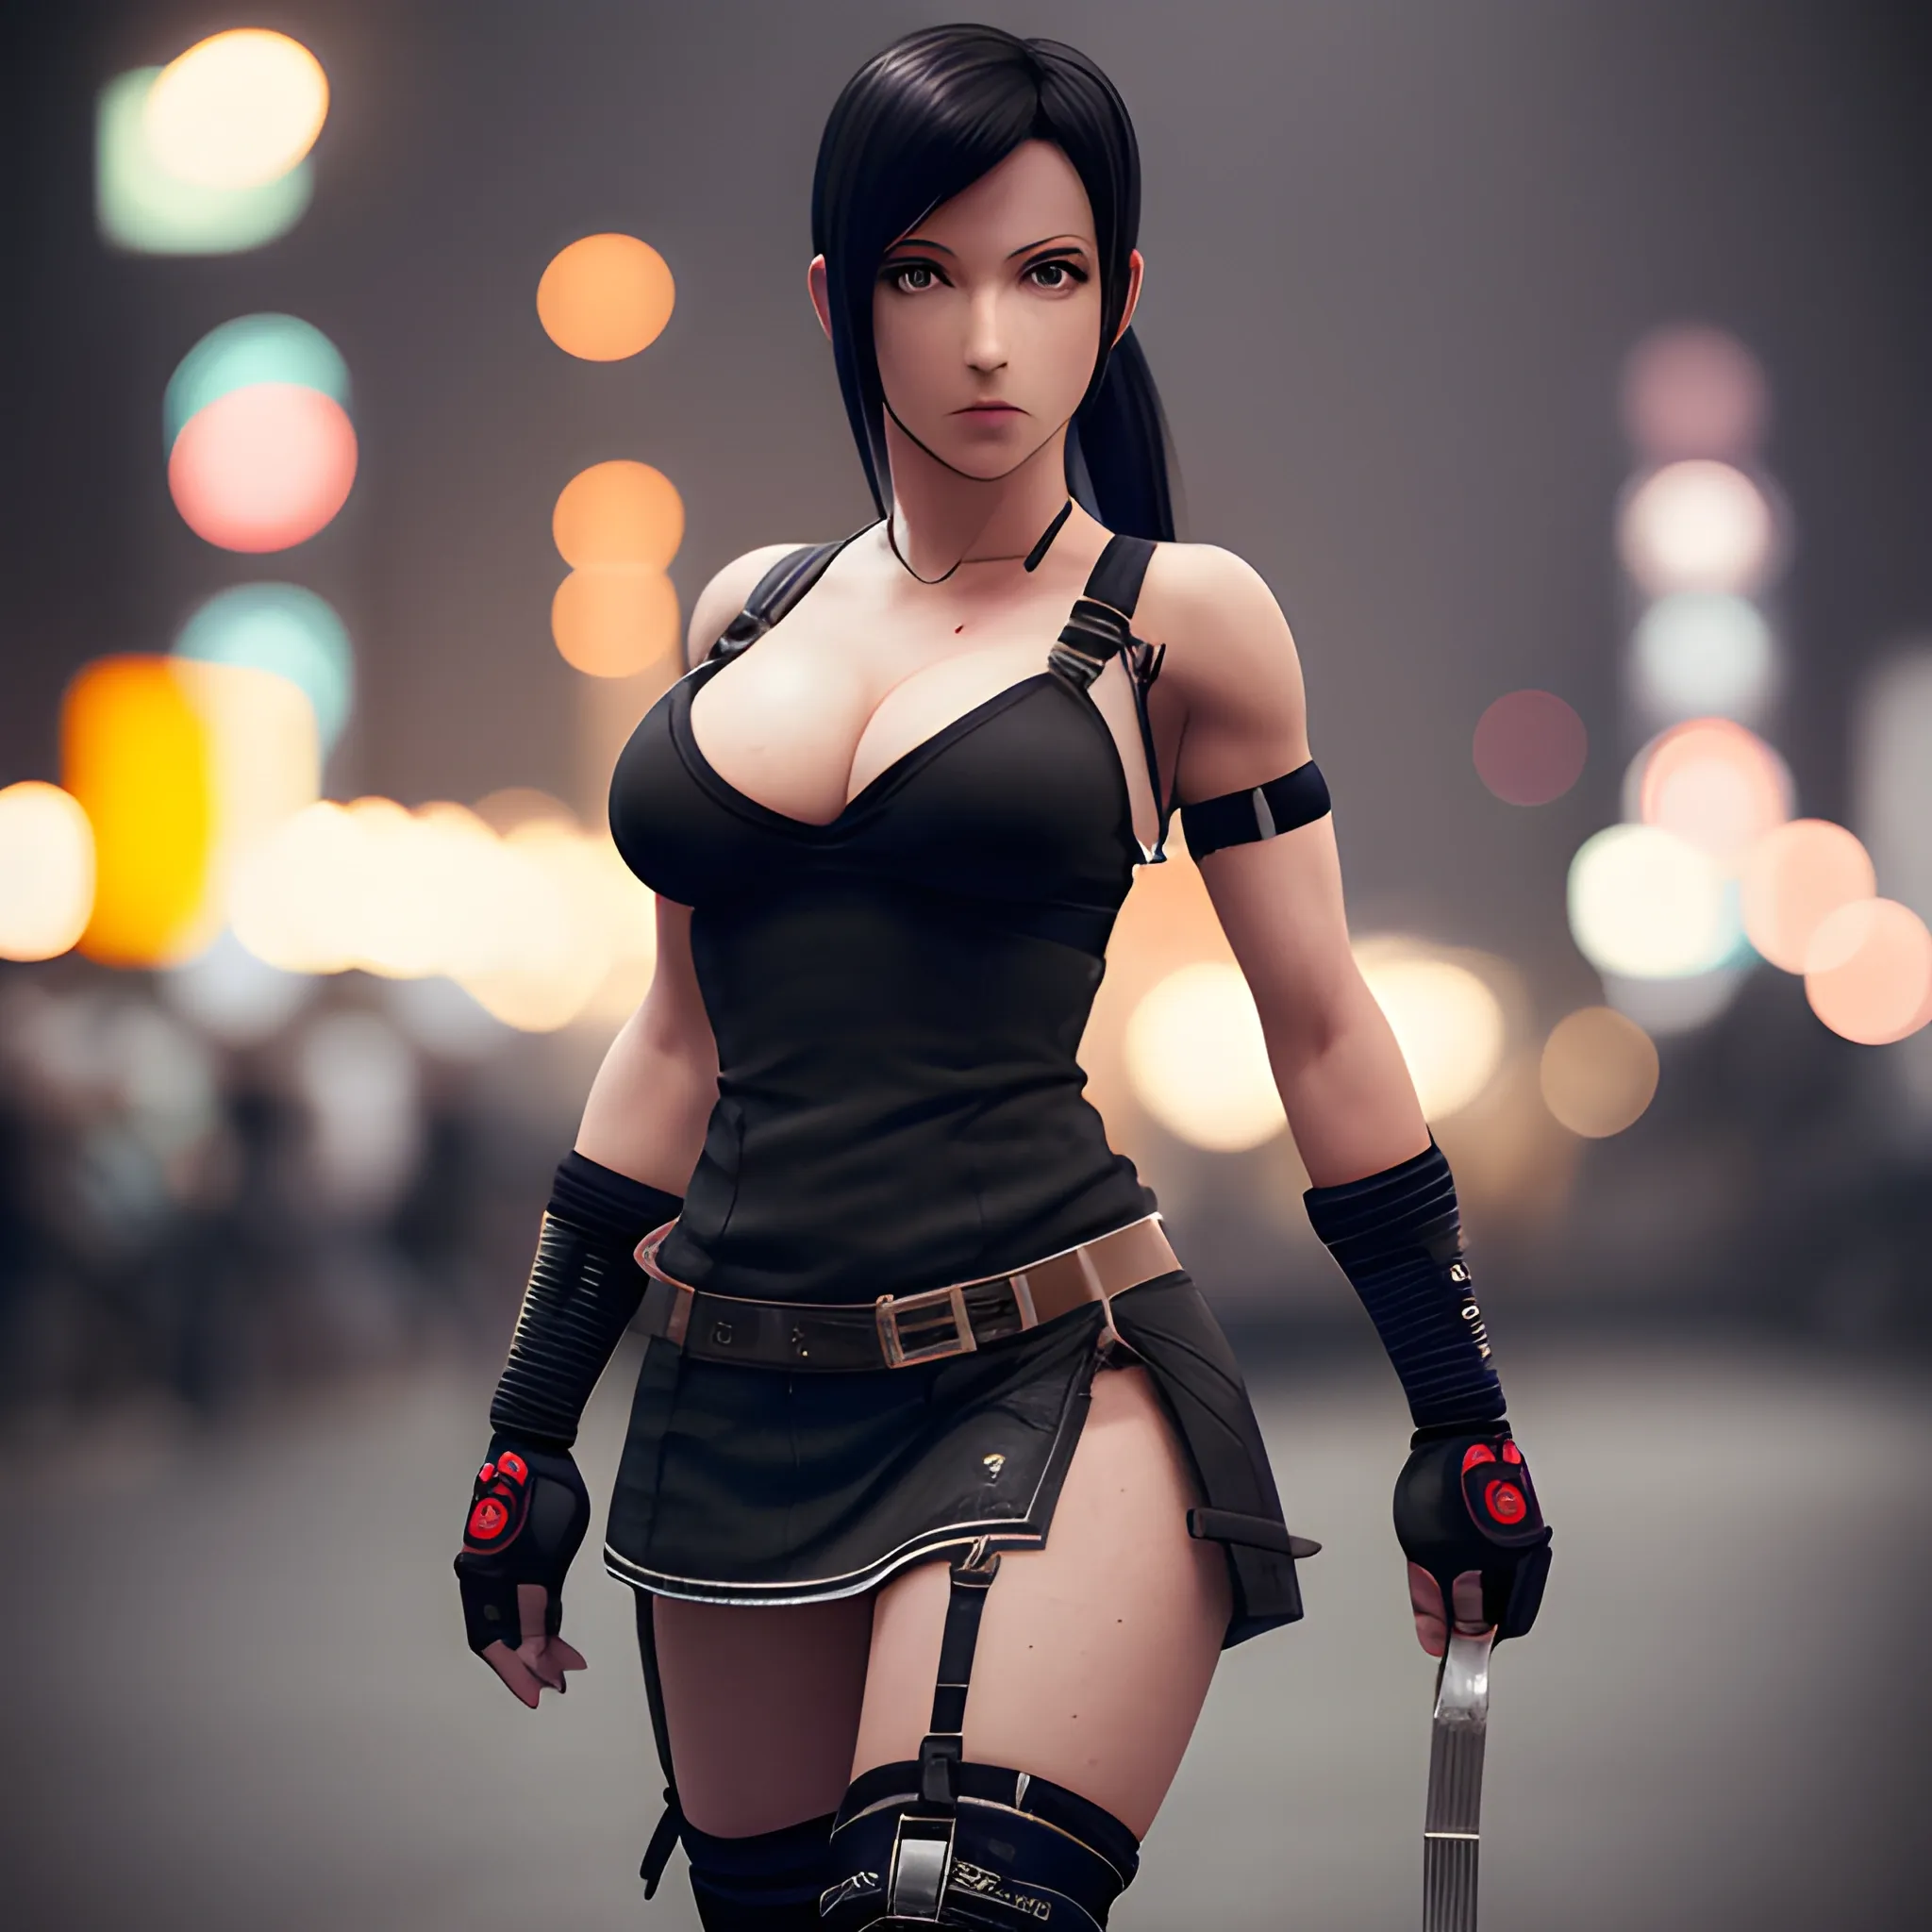 Create a detailed and accurate image of Tifa Lockhart from Final Fantasy VII. She should be depicted with her signature strapped hair, which is tied up in a long, high ponytail with a black strap. Tifa is wearing her iconic outfit: a white tank top, cleavage, big breasts, black mini-skirt, red gloves, and black combat boots. sweating. She also has her black suspenders, elbow guards, and knee-high socks.,outdoors,bokeh,(highres, highly detailed:1.2),cinematic lighting,vibrant colors,